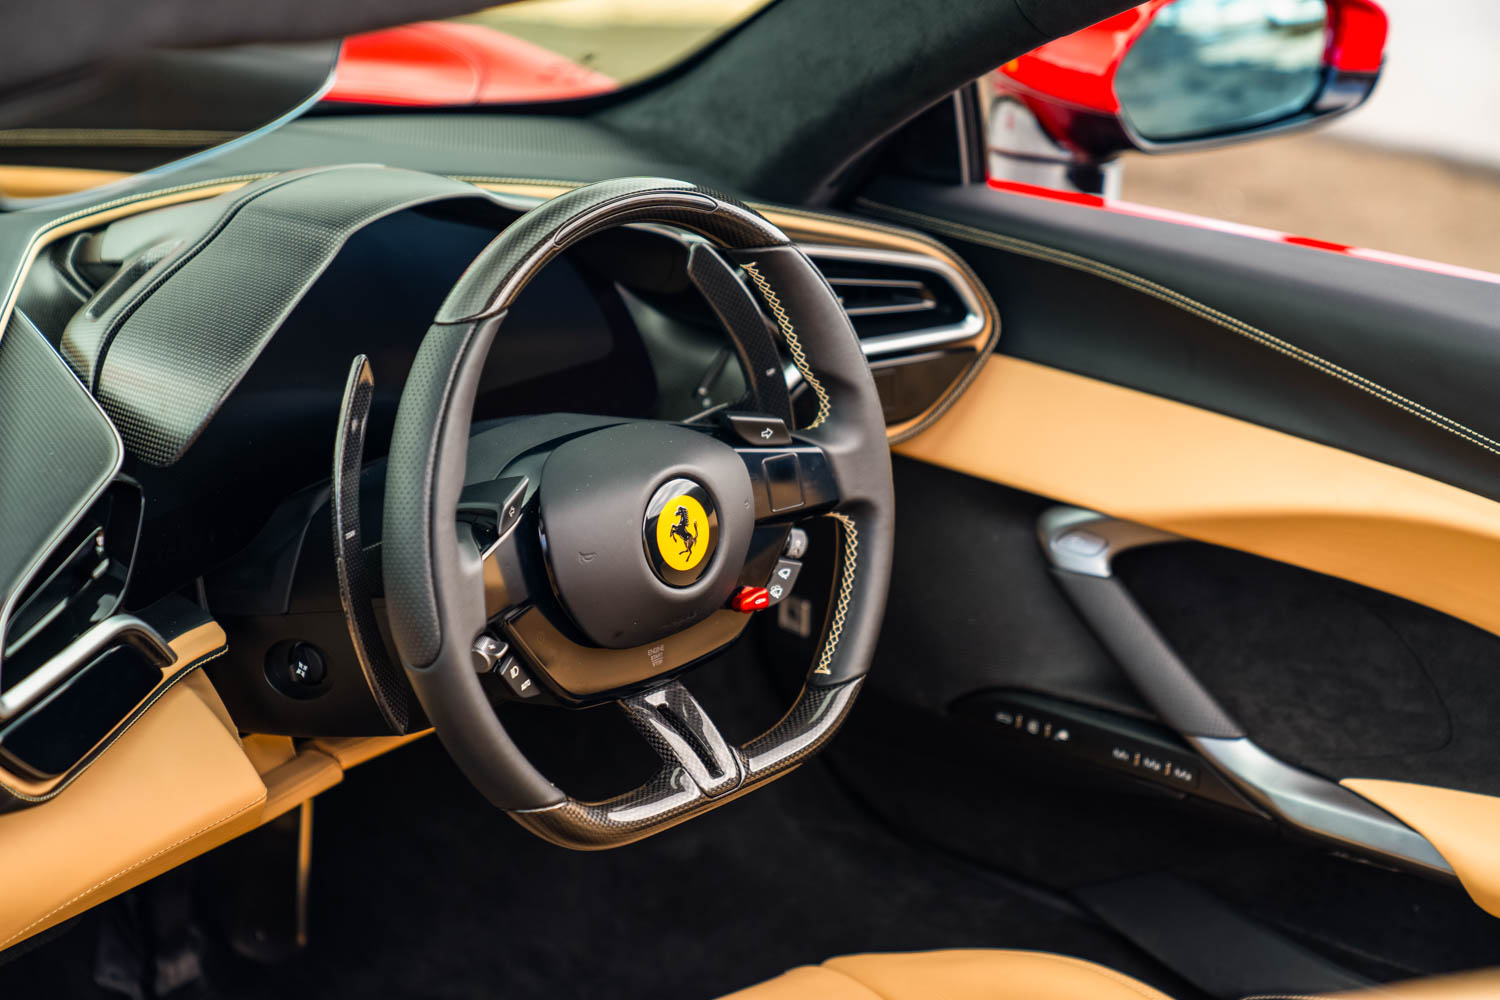 The most complete model Ferrari currently makes is a $700,000 convertible masterpiece